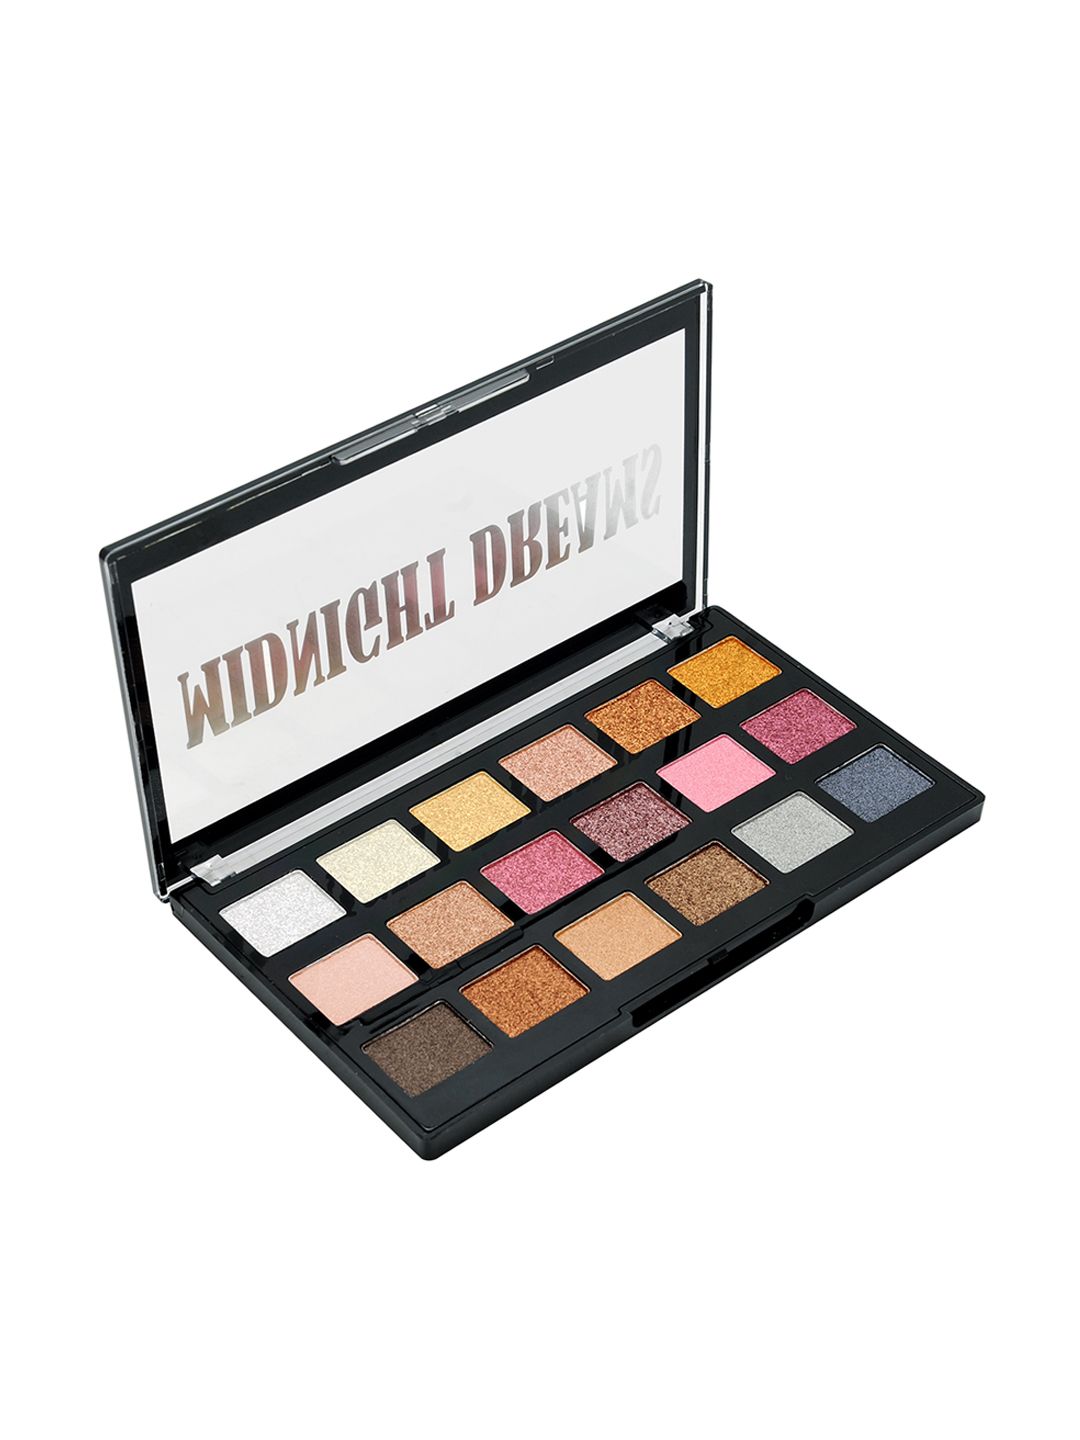 INCOLOR Midnight Dreams 18-in-1 Eyeshadow Palette 02 Price in India